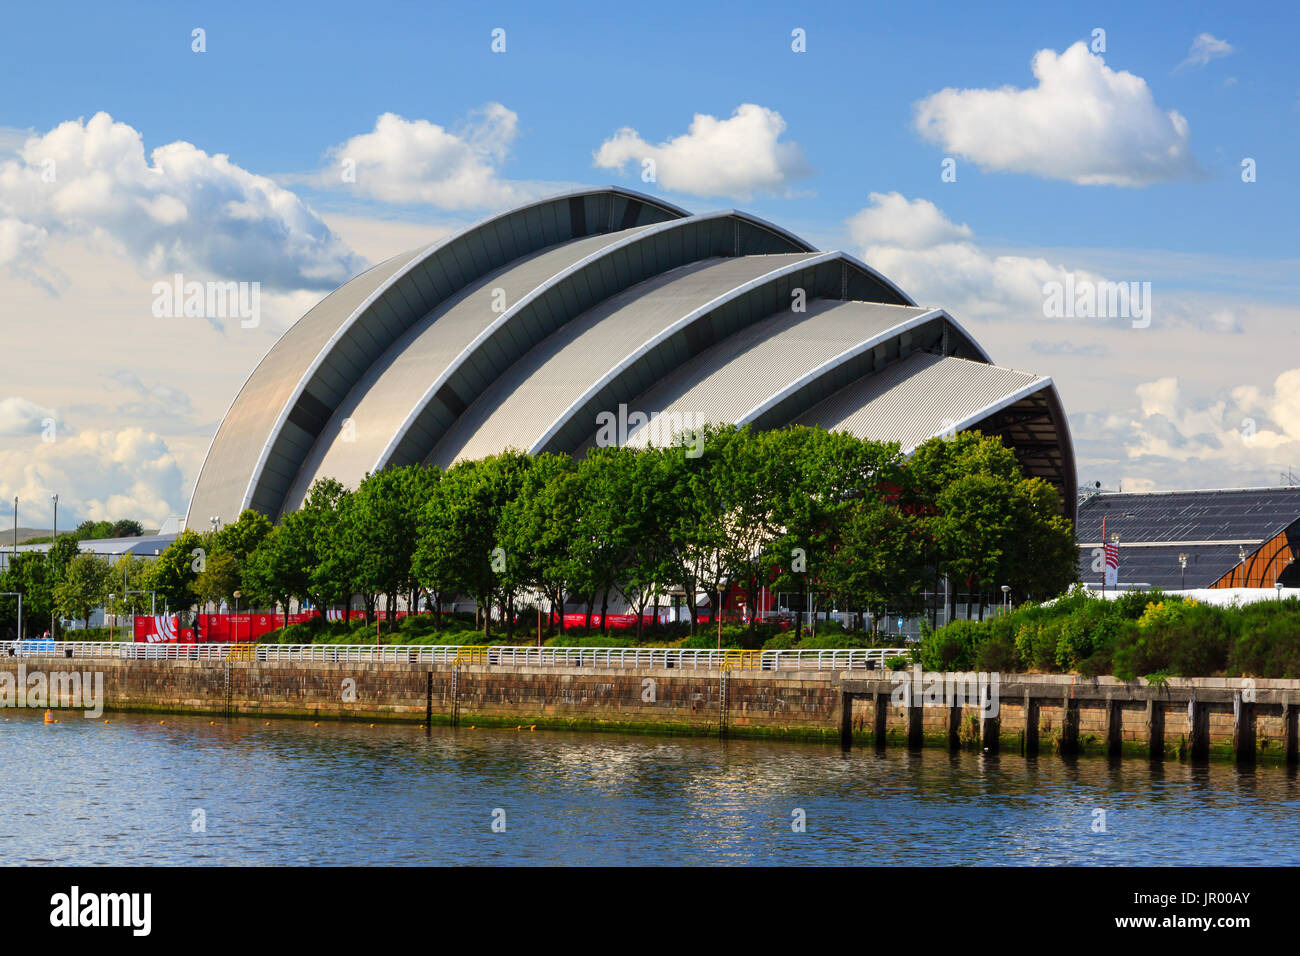 The Clyde Auditorium on the banks of the River Clyde in Glasgow, Scotland.  The auditorium is a conference venue and is nicknamed the armadillo. Stock Photo